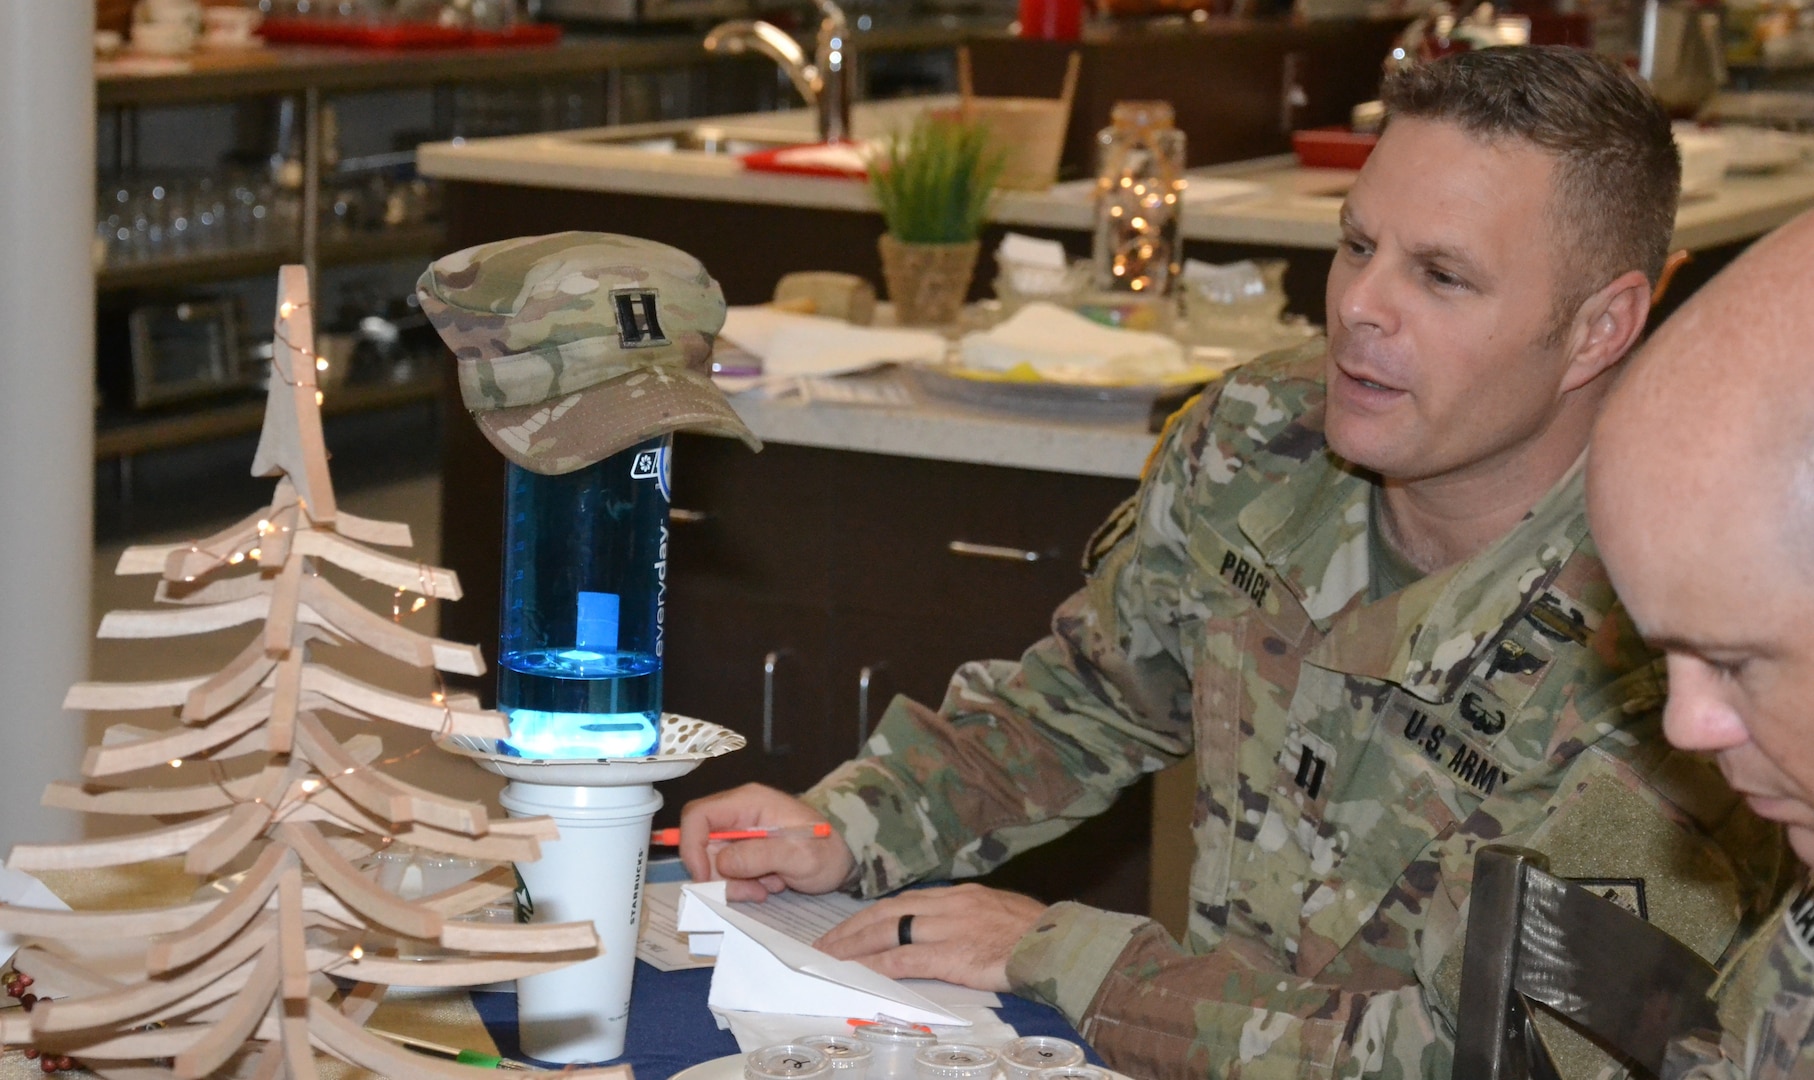 Capt. Aaron Price, 232nd Medical Battalion, Company E, commander, looks at a tower made of different objects during an activity in which servicemembers had to complete as many tasks as possible in five minutes at “The Gift of Presence: Resiliency Reset” event held at the Vogel Resiliency Center located inside Joint Base San Antonio-Fort Sam Houston Nov. 30.